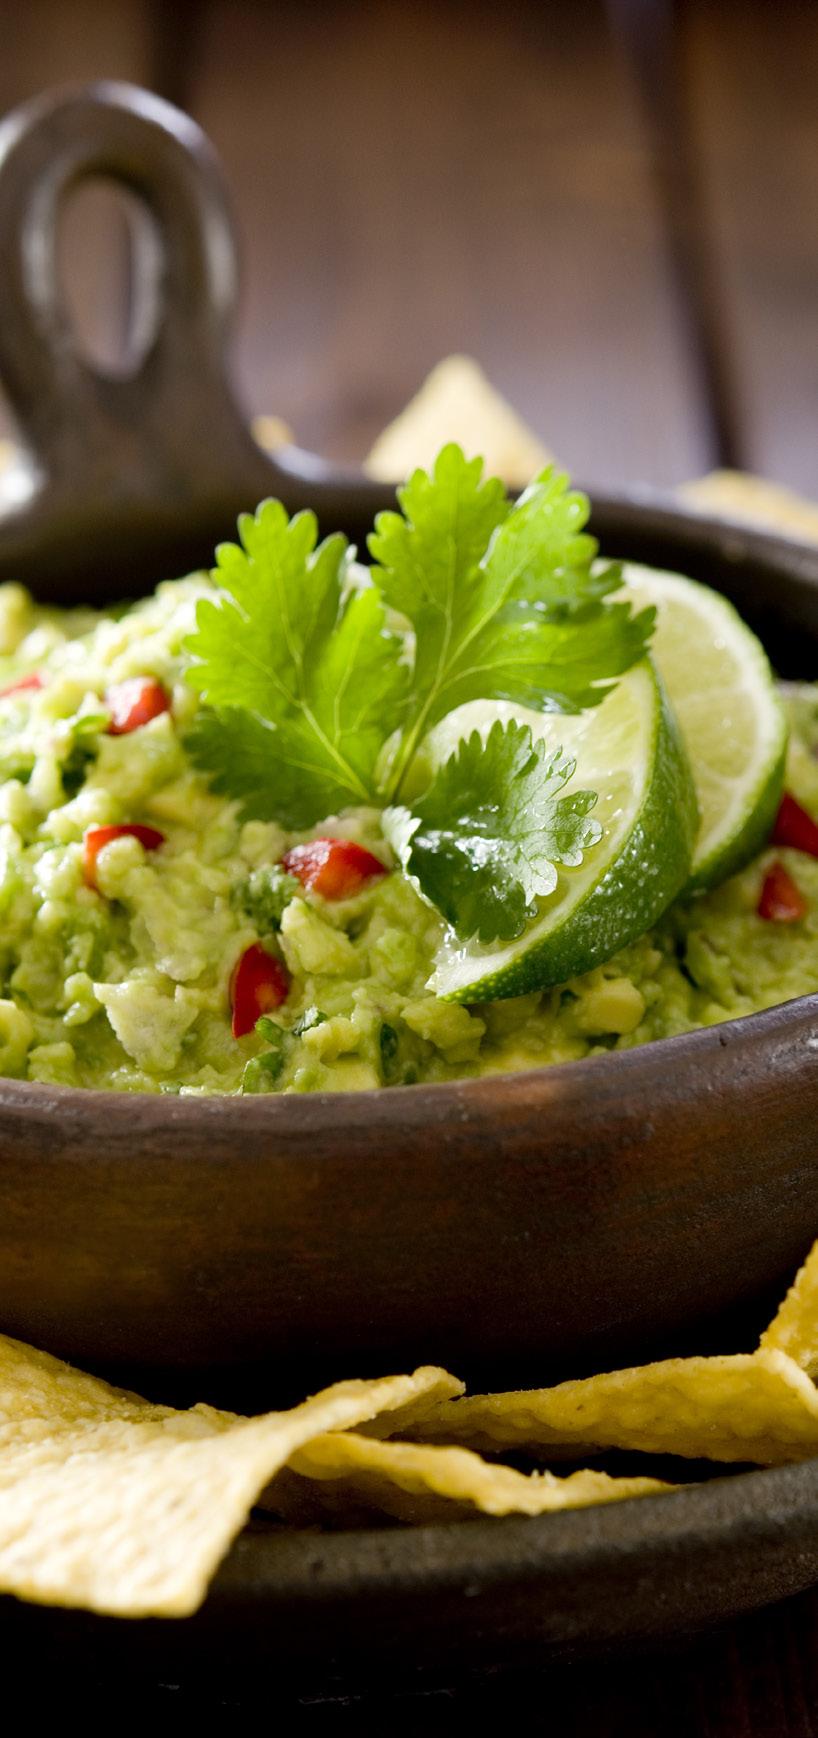 jalapeño, and half the cilantro in a mortar or food processor, then grind or pulse into a smooth paste.